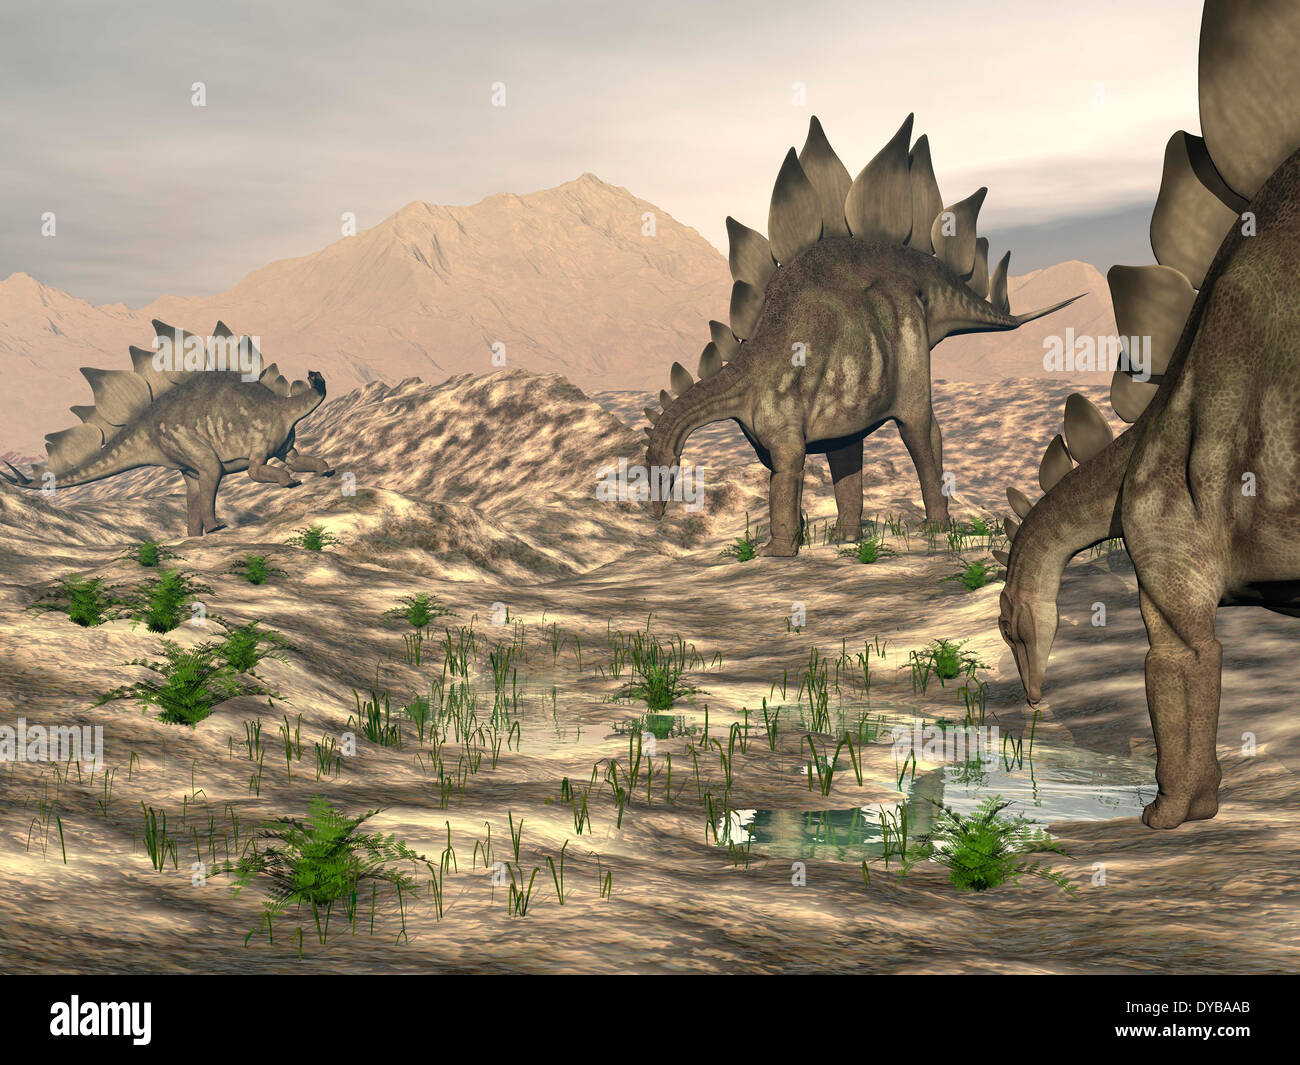 Stegosaurus dinosaurs searching for water in a desert landscape. Stock Photo